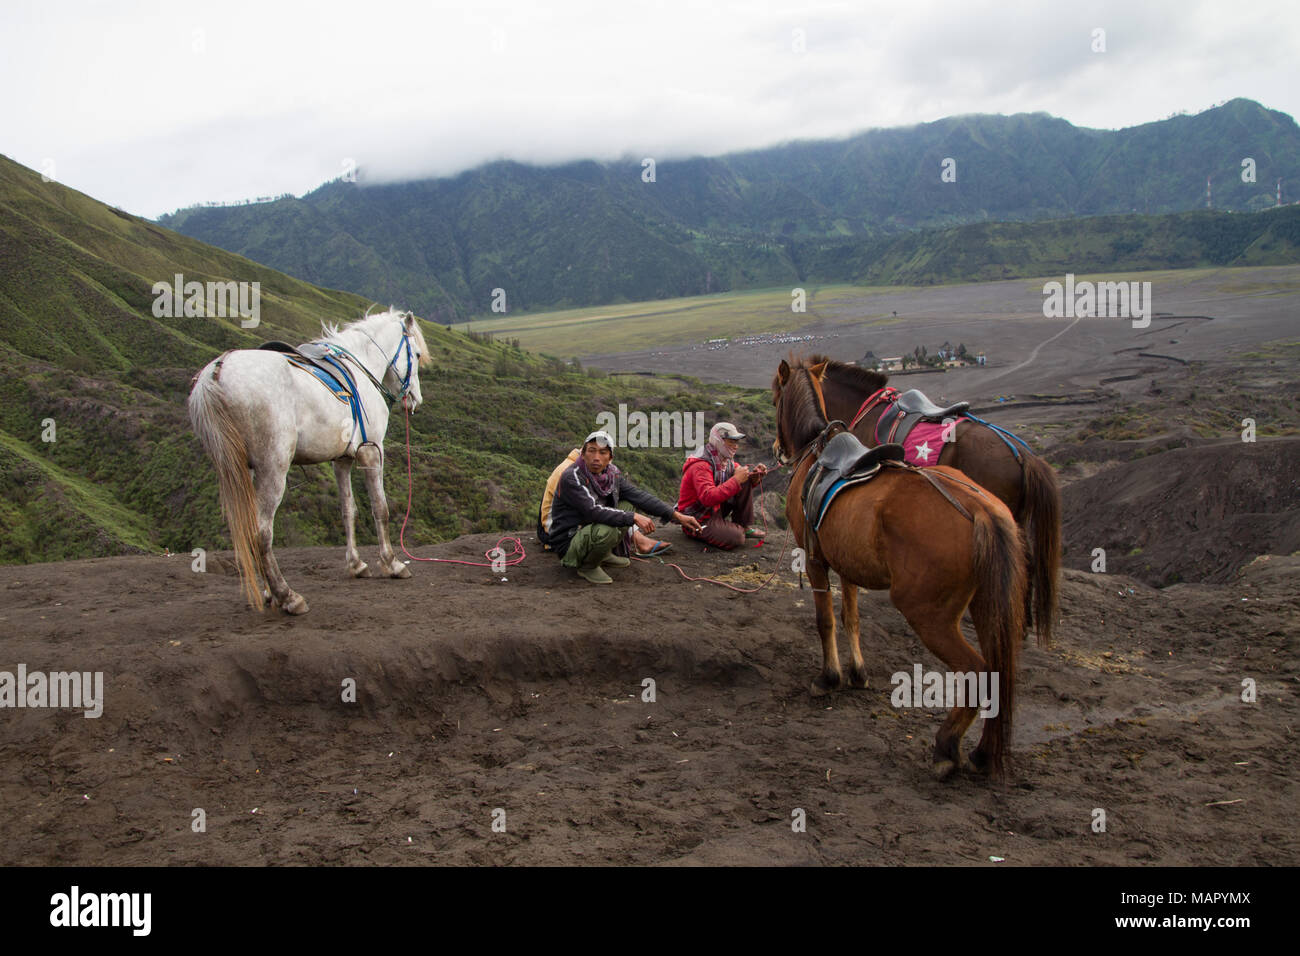 Horsemen and horses on the banks of Mount Bromo volcano, Eastern Java, Indonesia, Southeast Asia, Asia Stock Photo